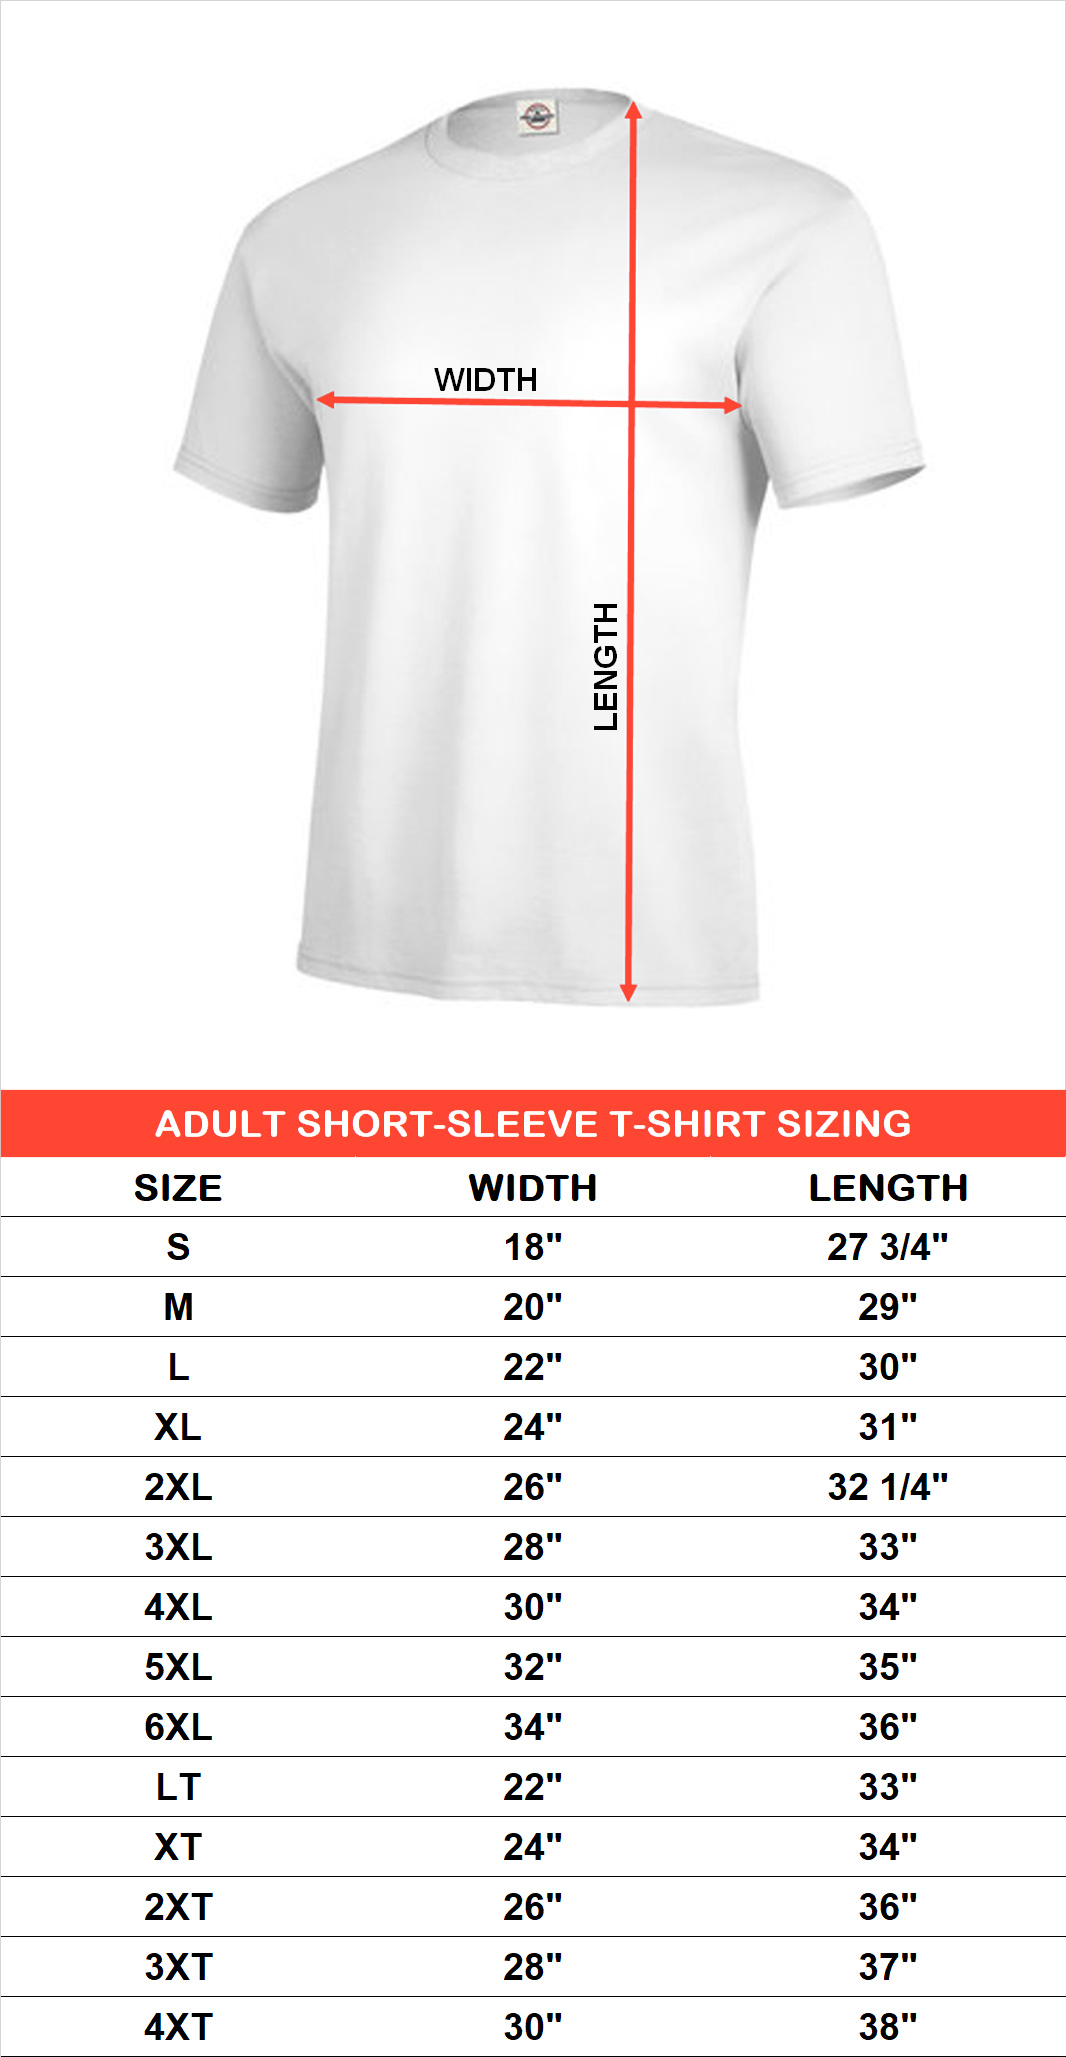 Sizing chart for the Ace Ventura Pet Detective Lost Shih Tzu t-shirt ACE530